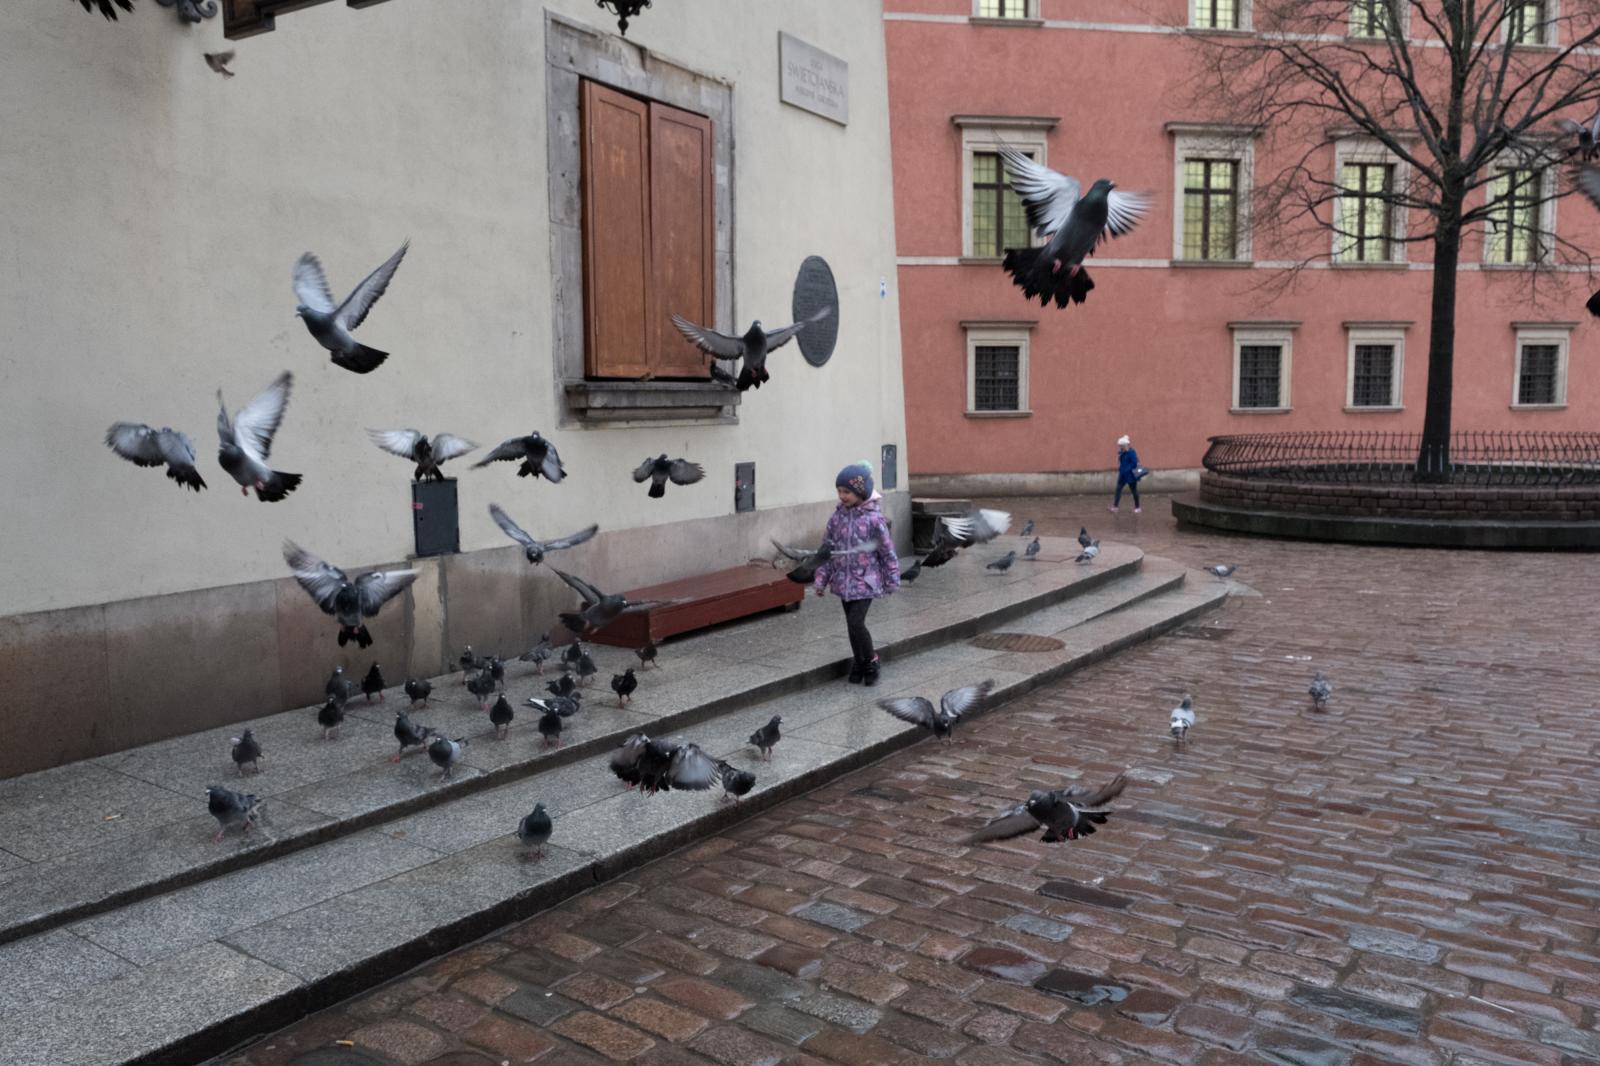 Child playing amongst Pigeons in Warsaw